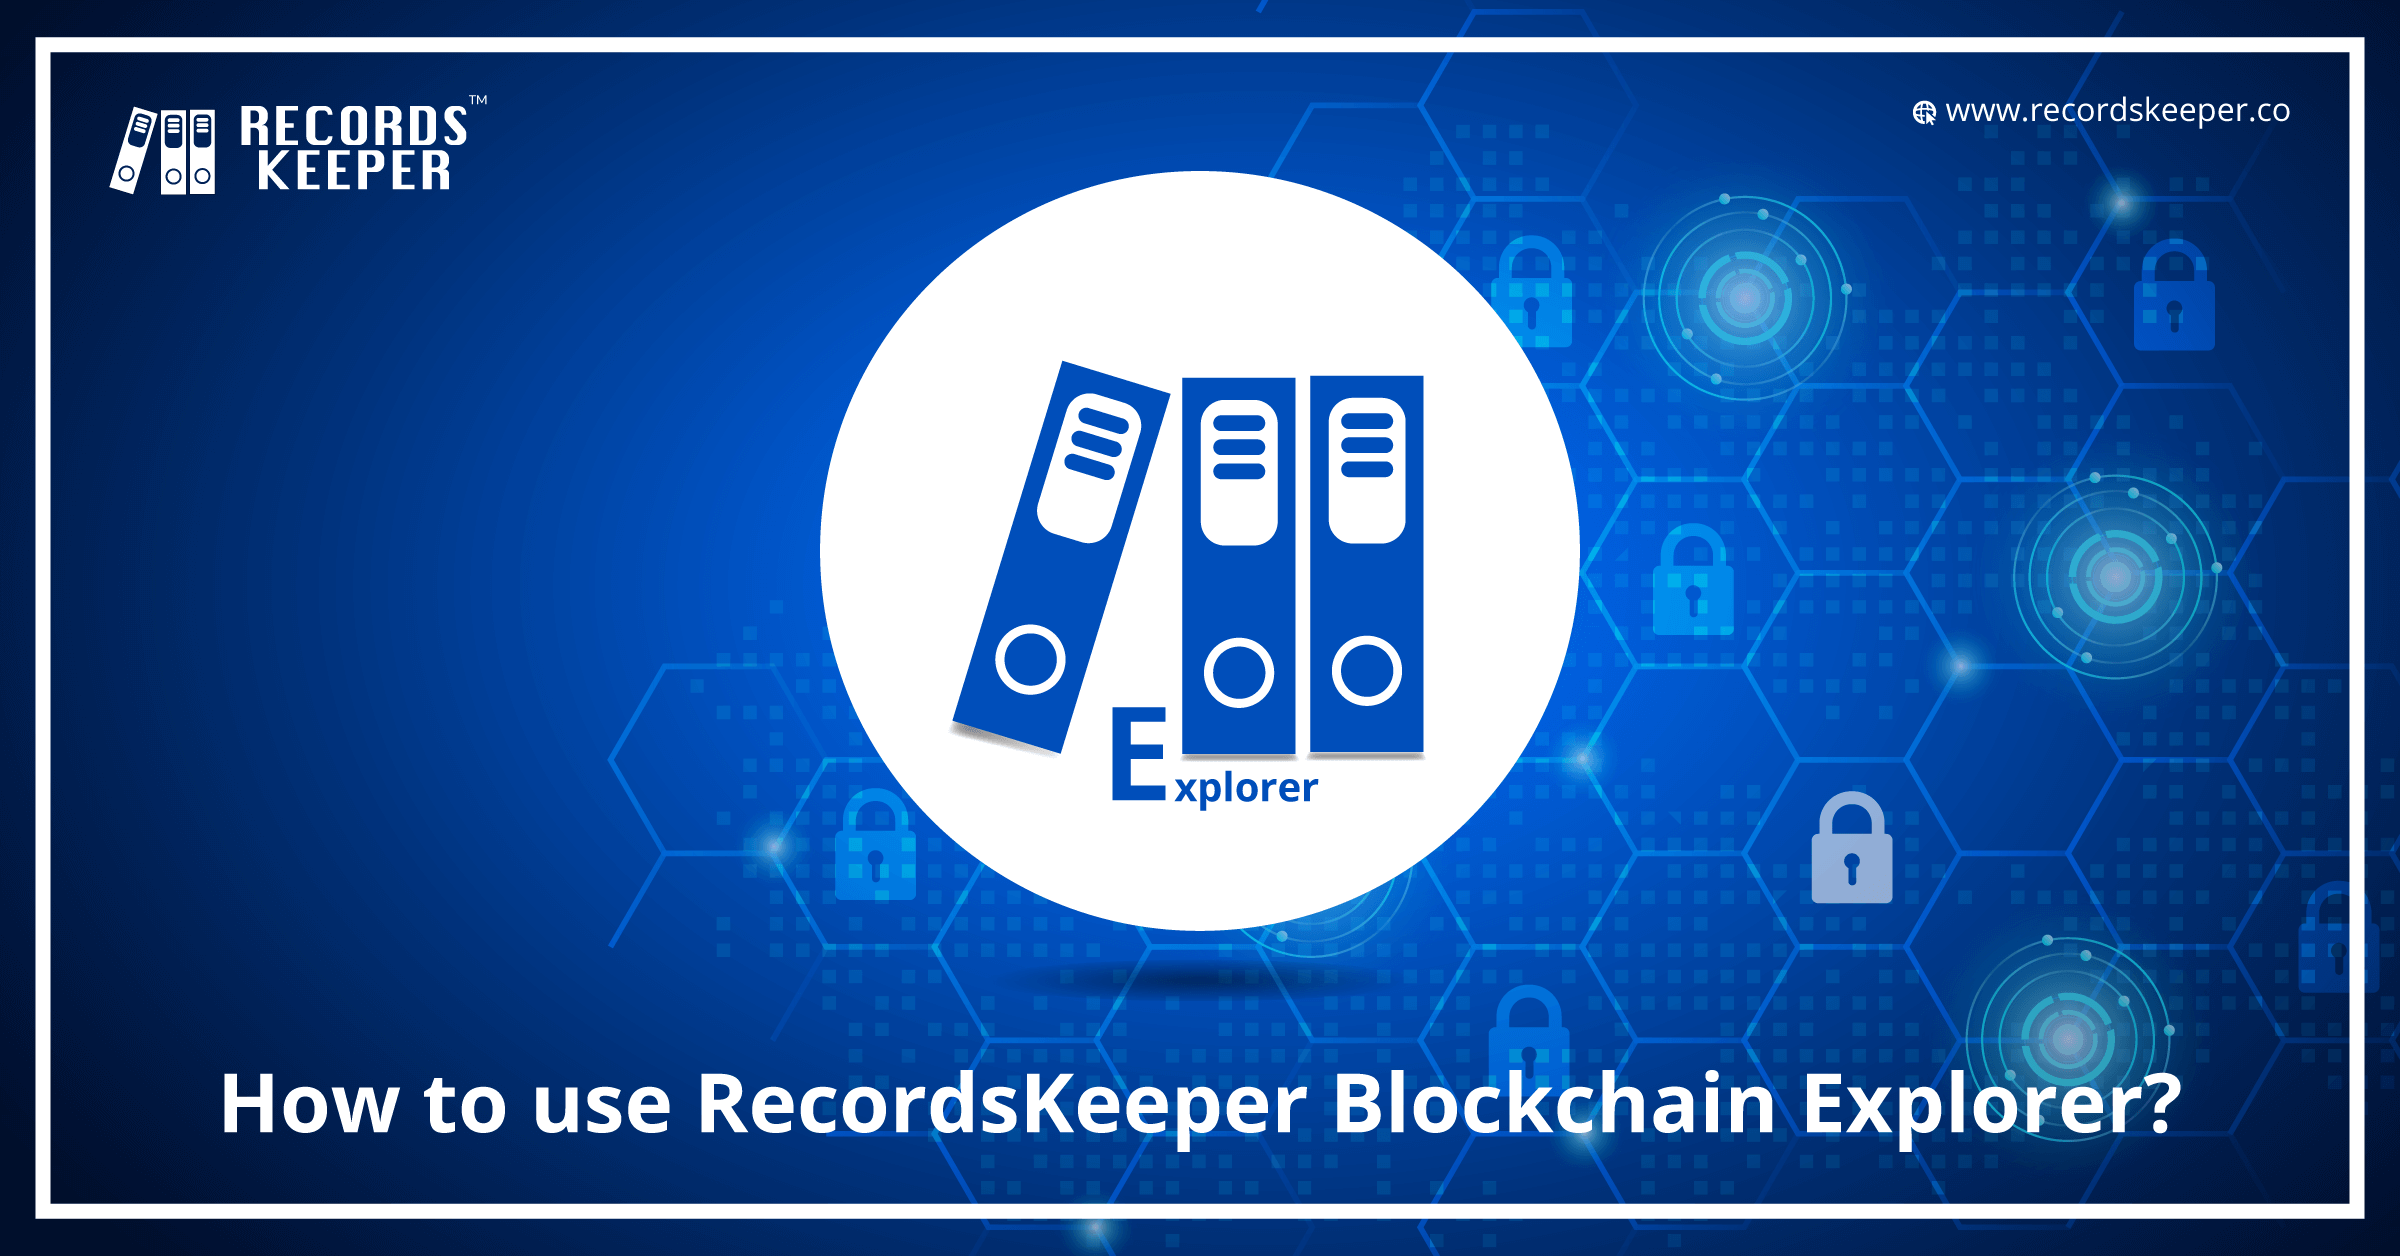 How to use RecordsKeeper Blockchain Explorer?